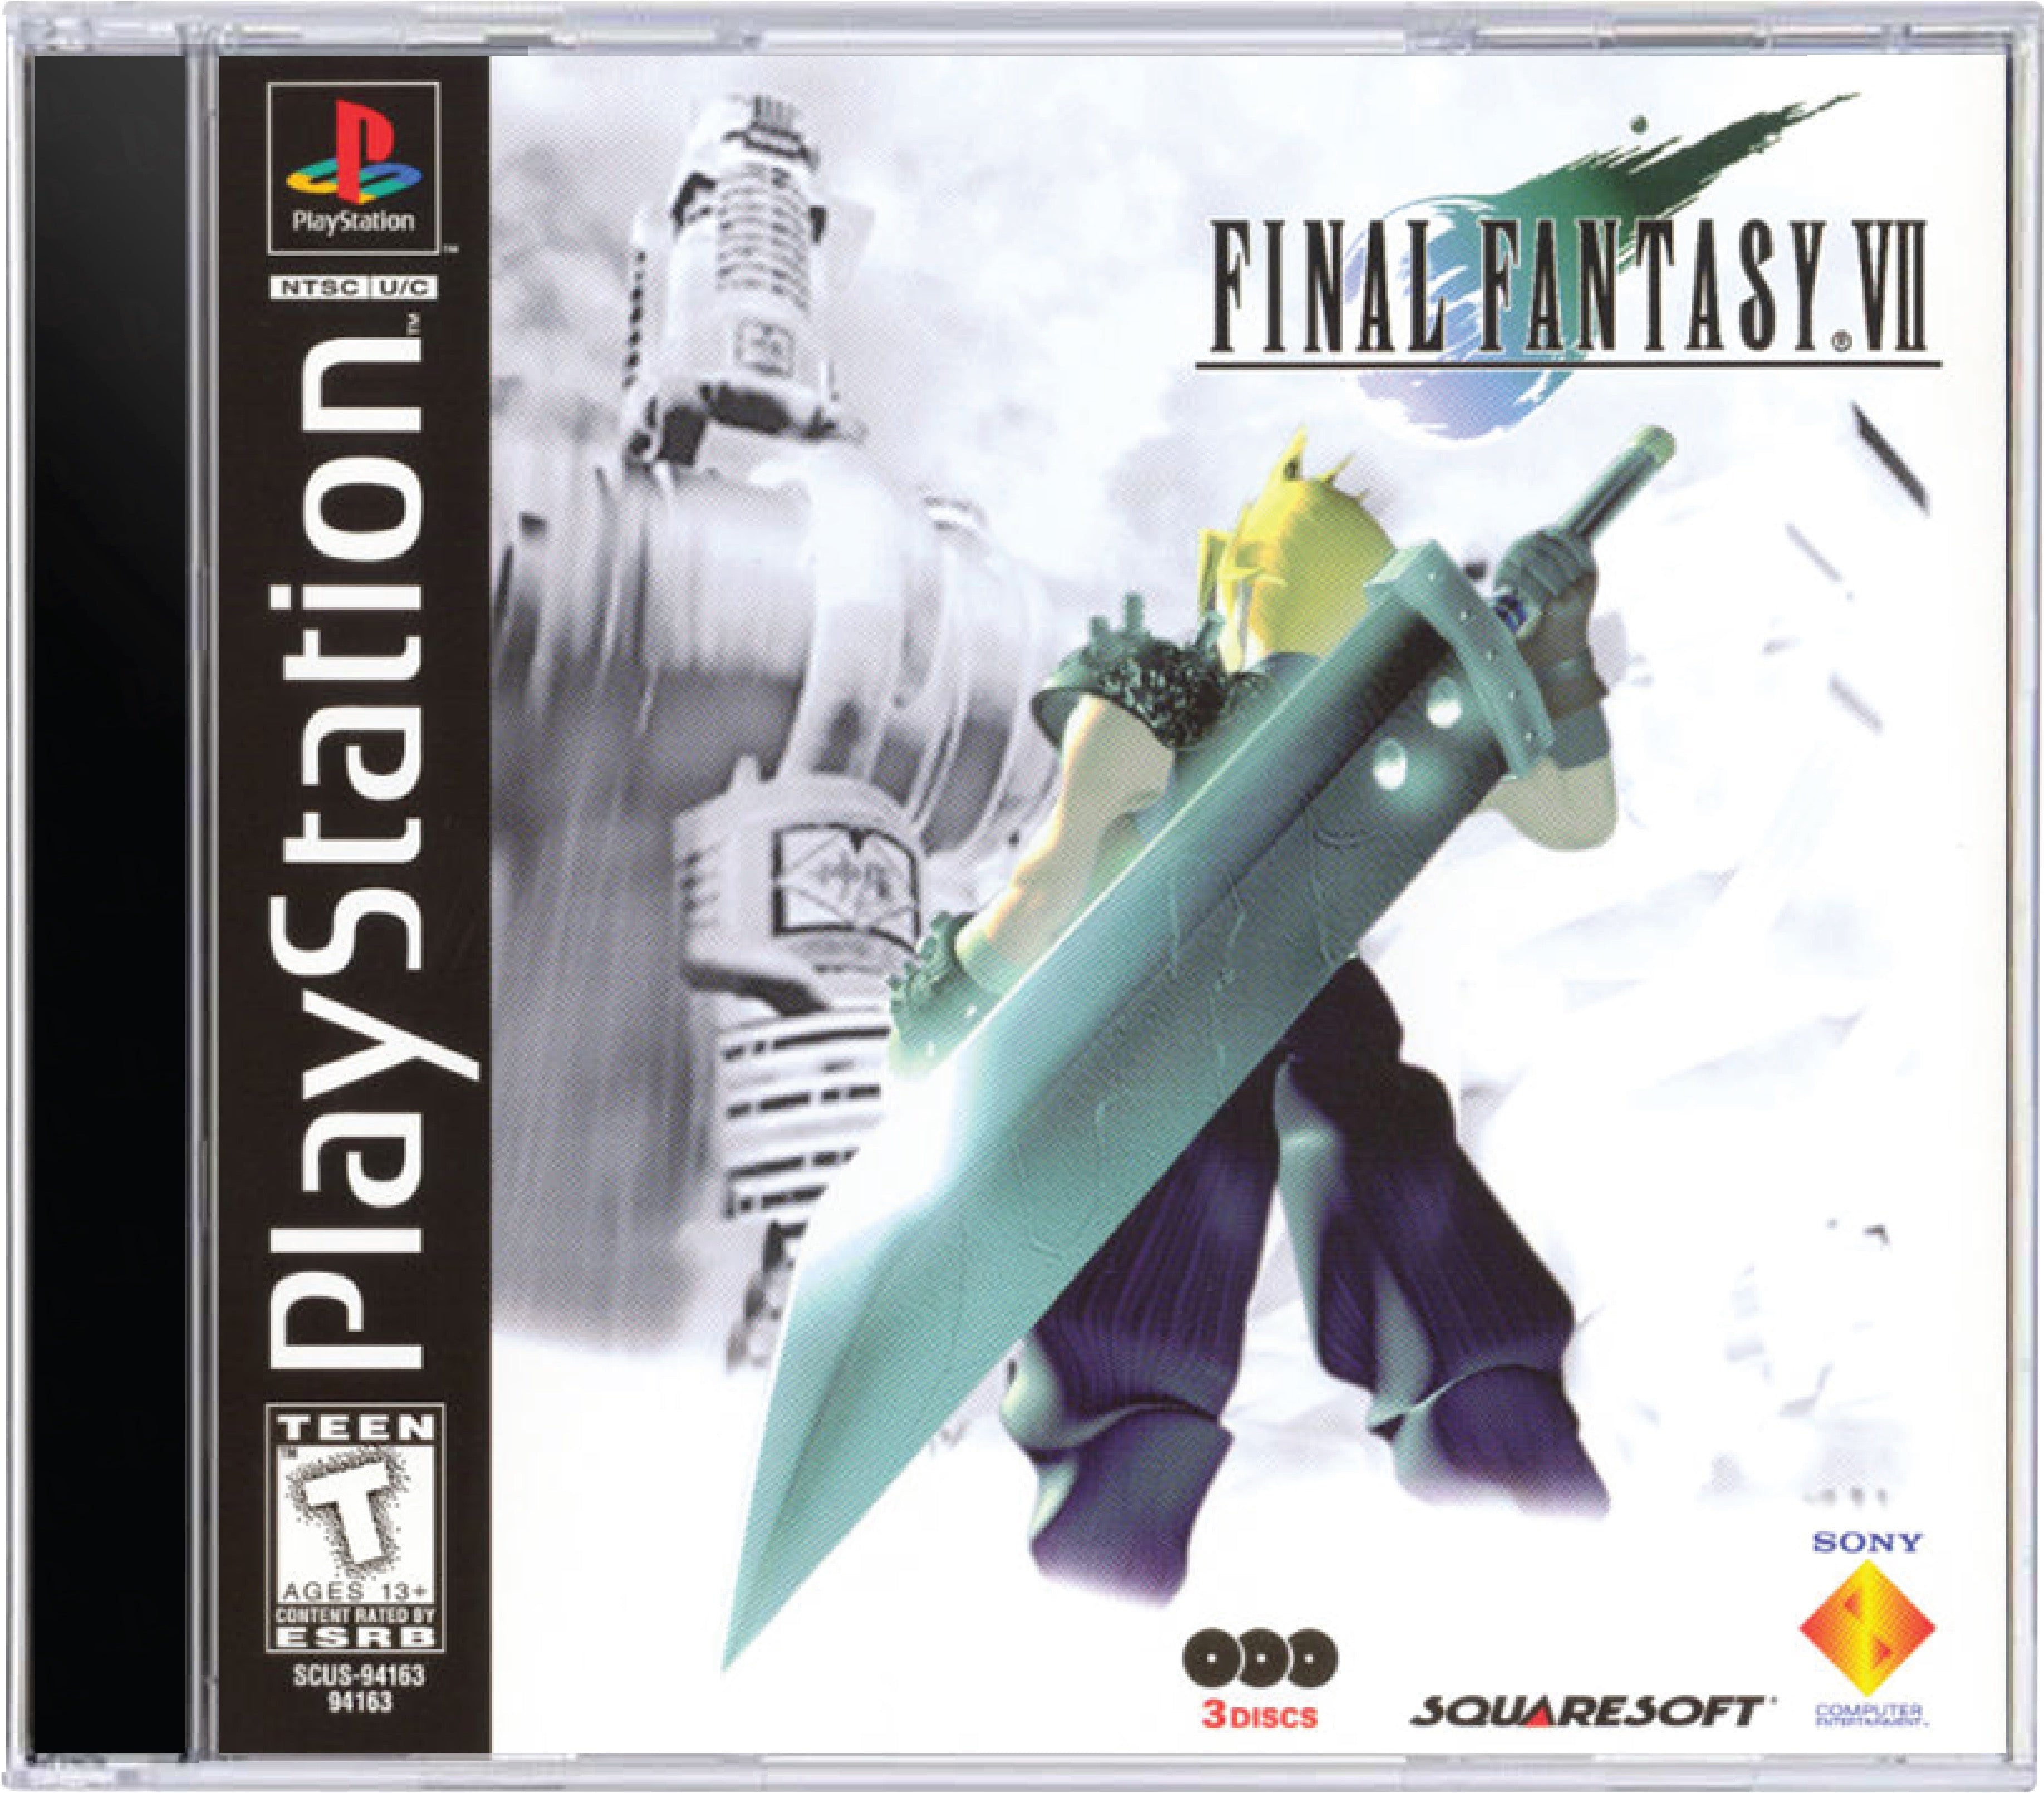 Final Fantasy VII Cover Art and Product Photo